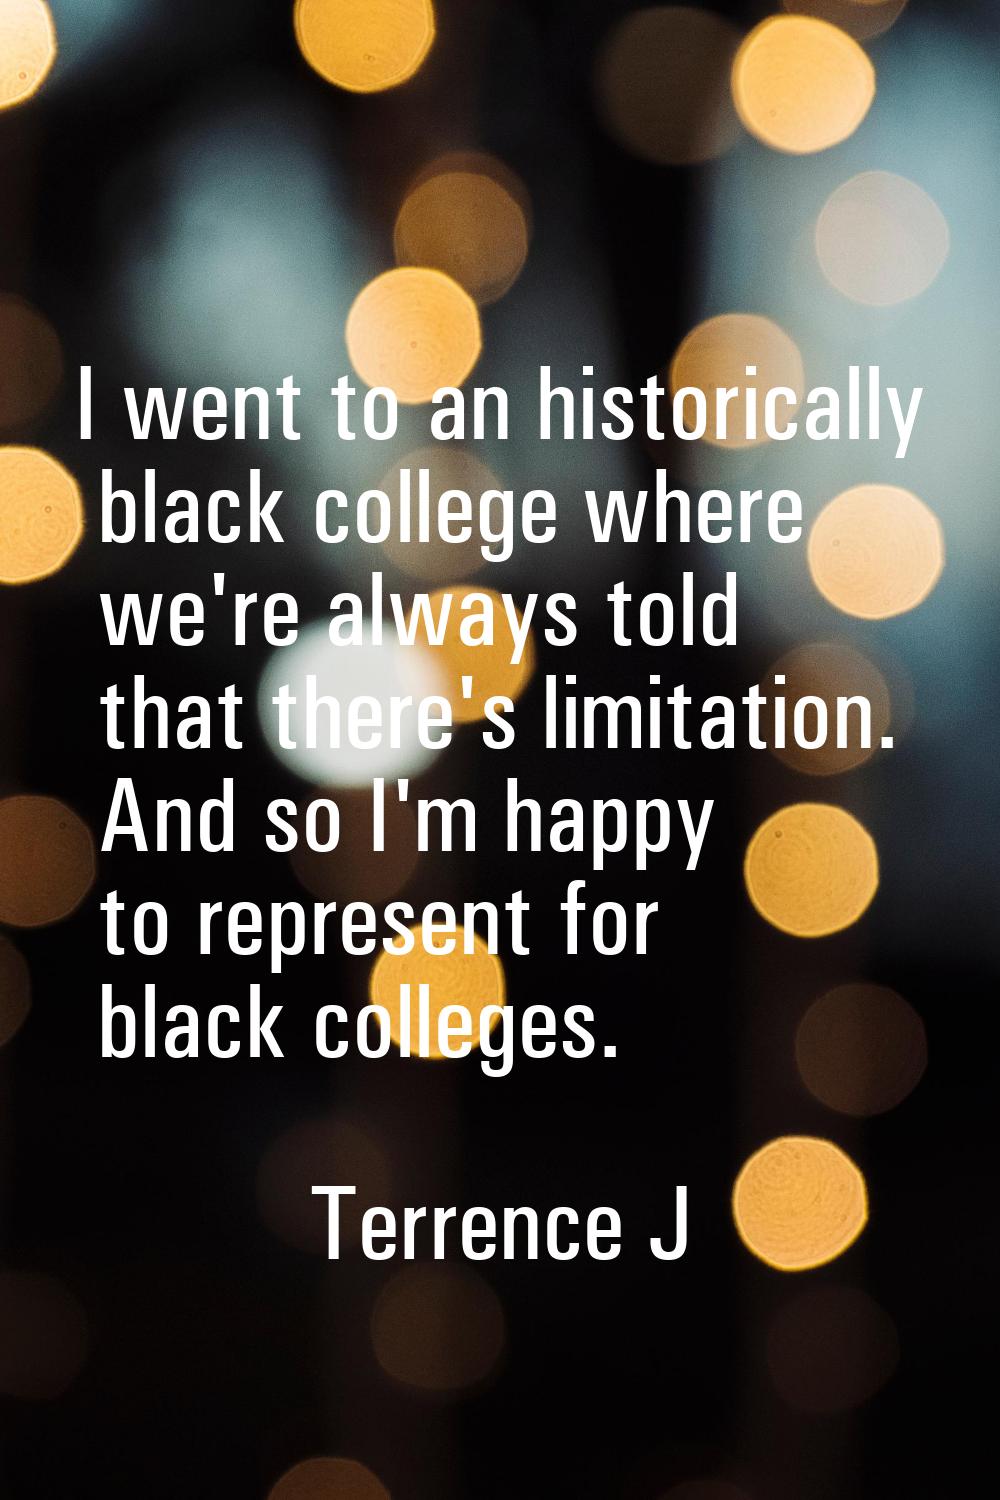 I went to an historically black college where we're always told that there's limitation. And so I'm